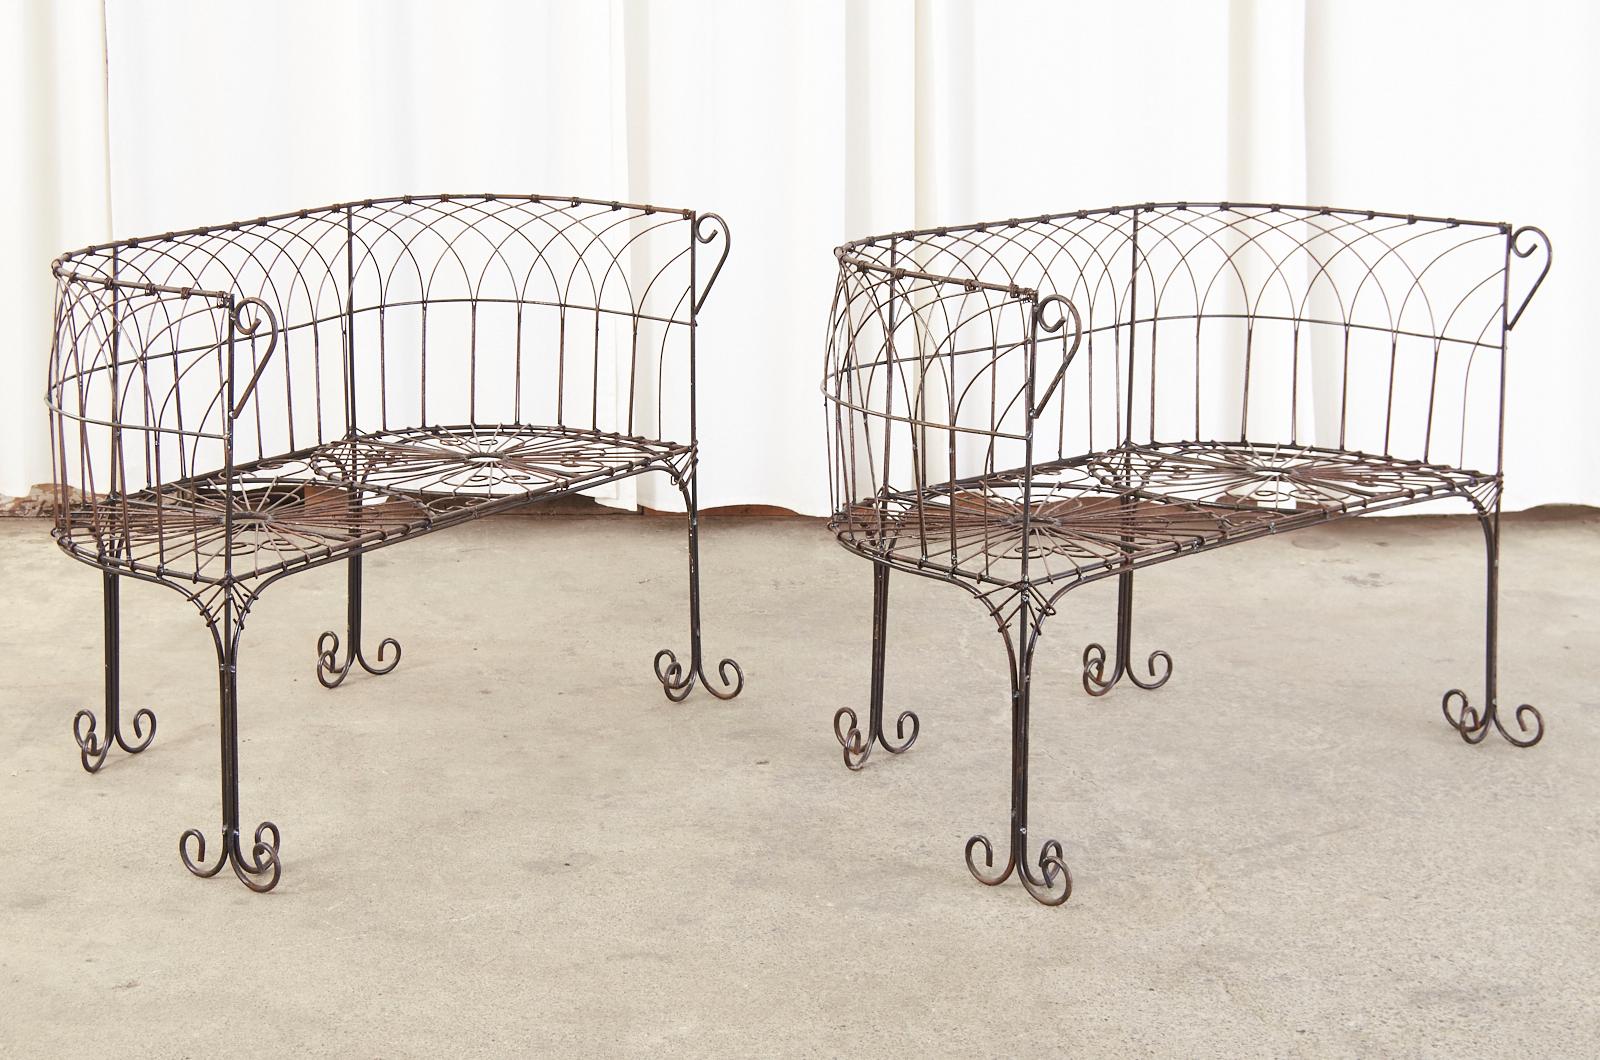 Splendid pair of wrought iron and wire French patio and garden benches made in the Art Nouveau taste. The benches or settees feature an iron frame decorated with gracefully curved wire lattice designs. Supported by straight legs ending with scrolled